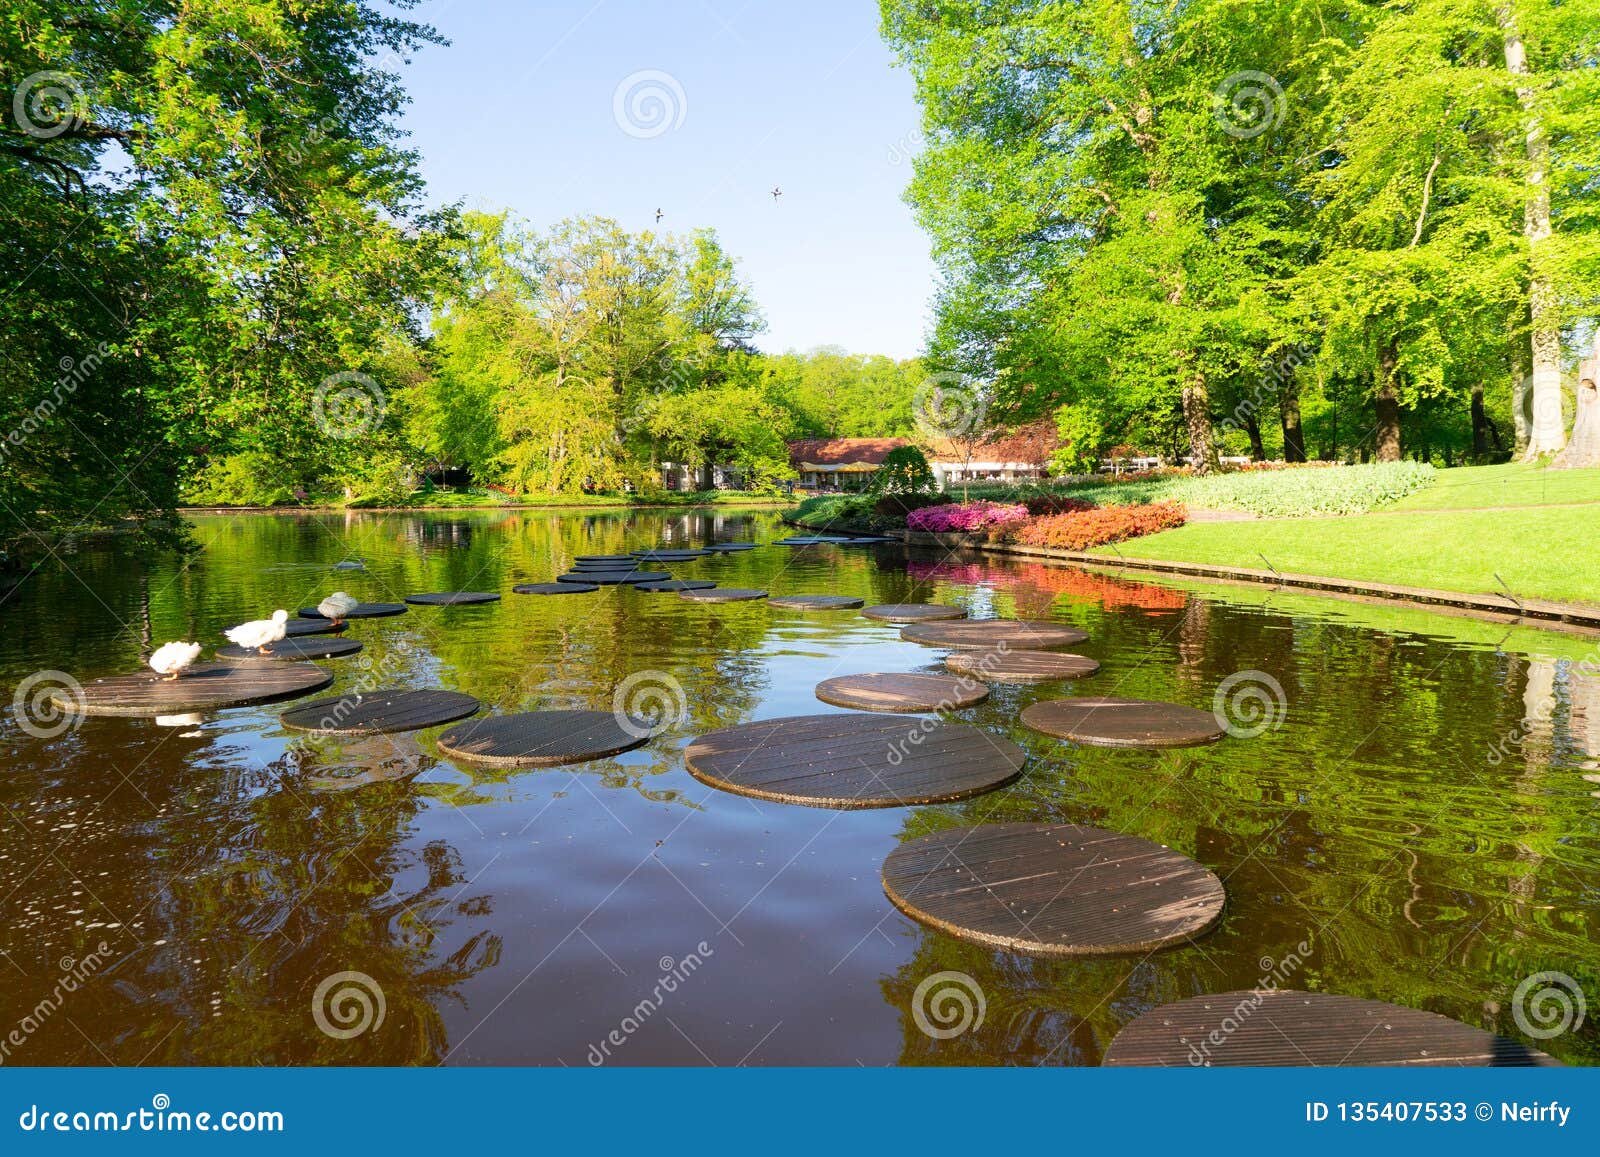 Spring pond in park stock image. Image of dutch, colorful - 135407533